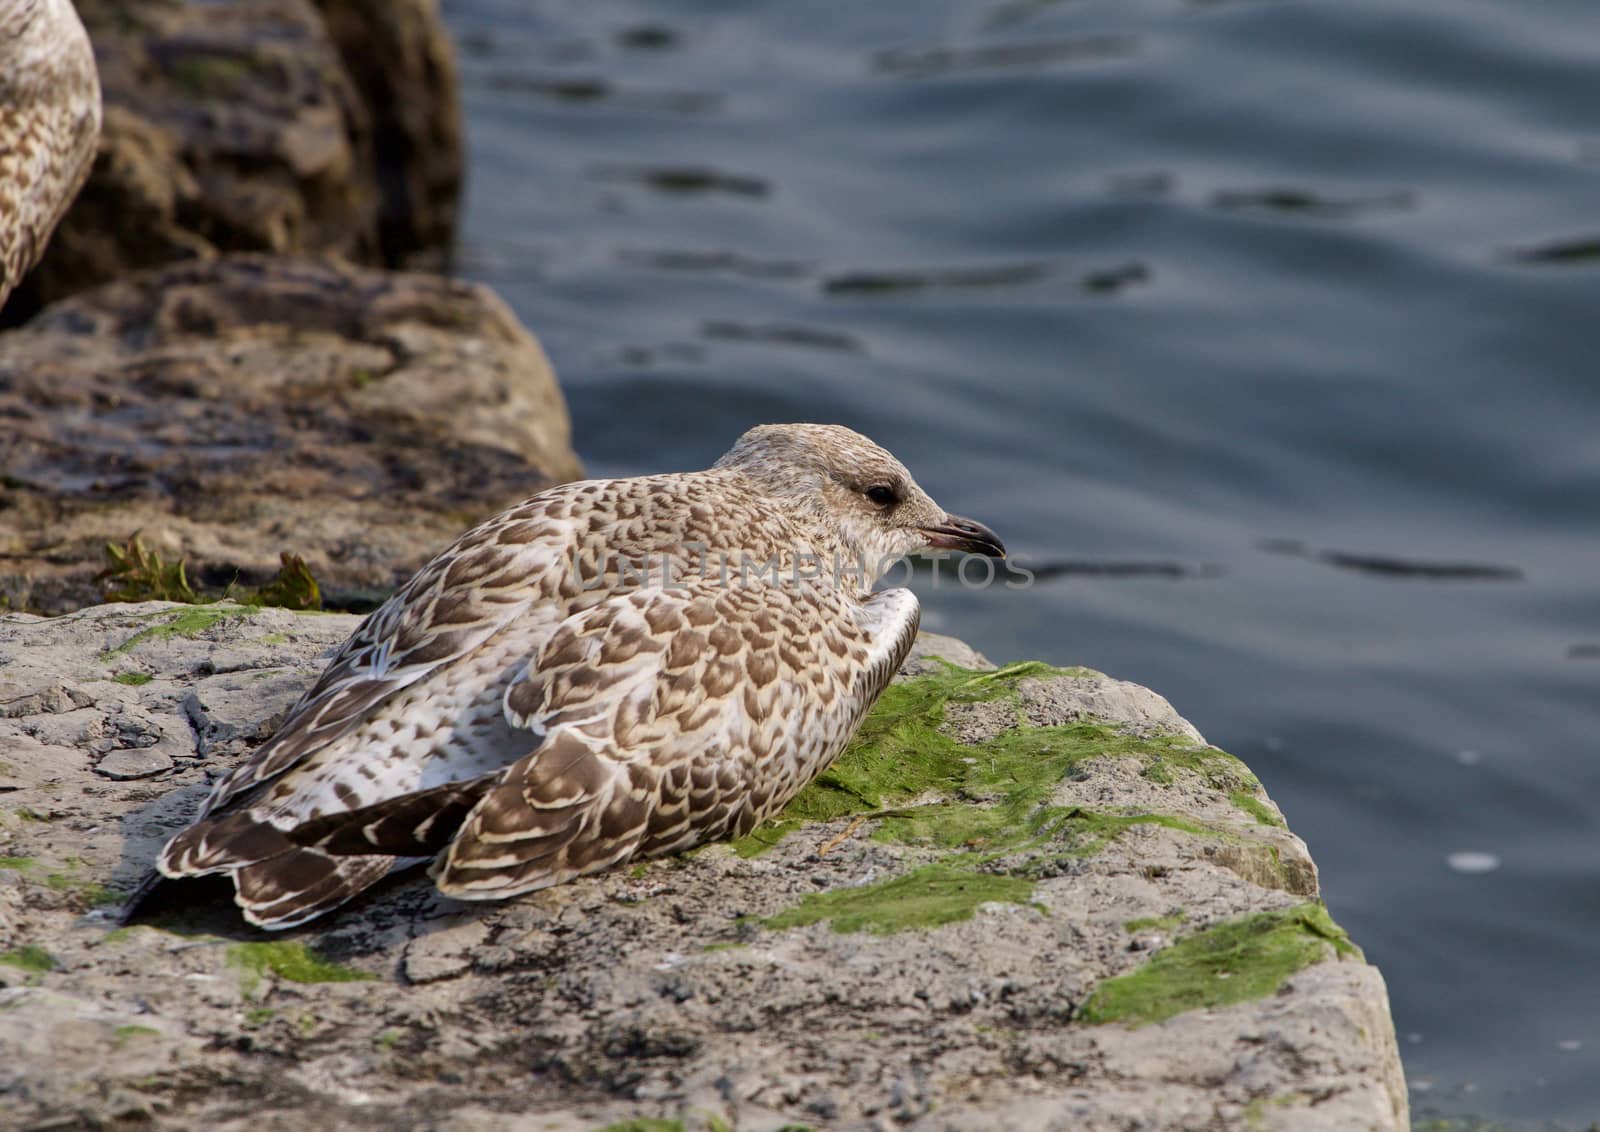 The gull is sleeping on the rock shore by teo